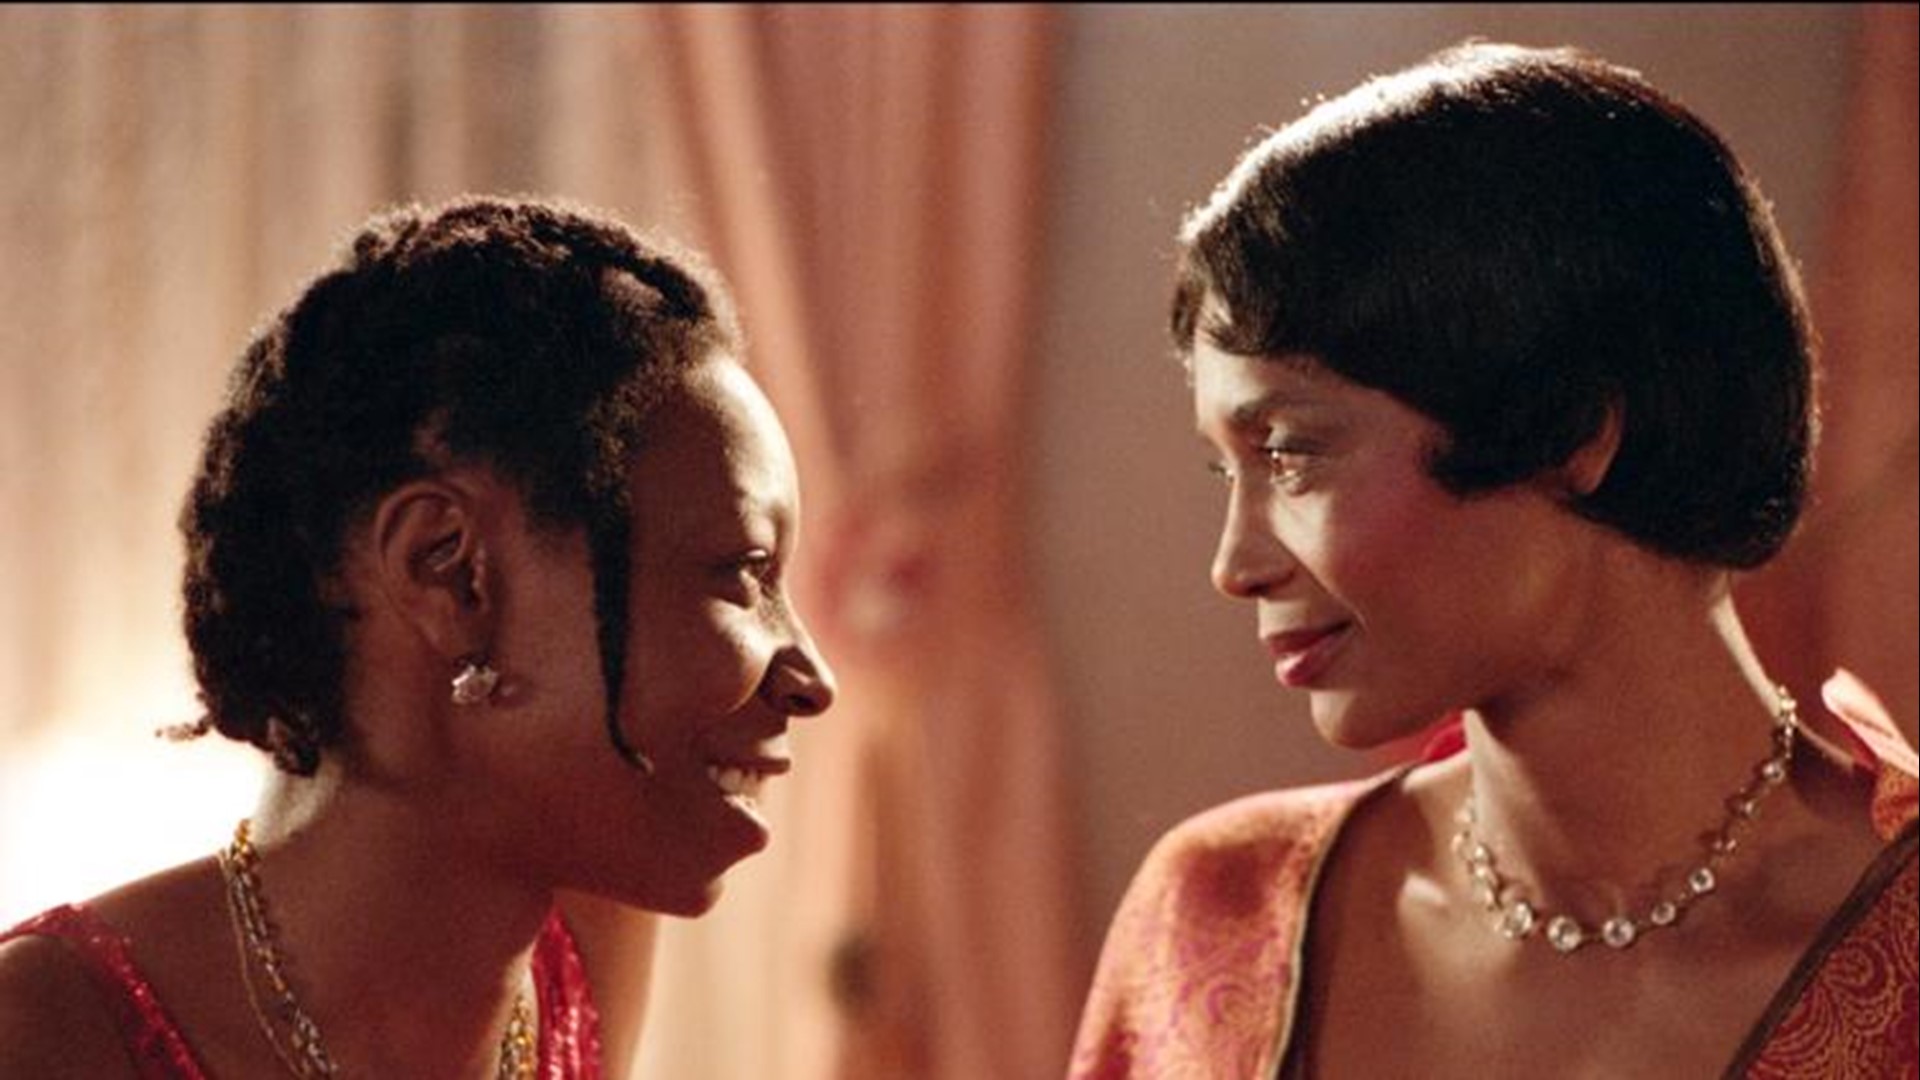 ‘The Color Purple’ returns to theaters for 35th anniversary